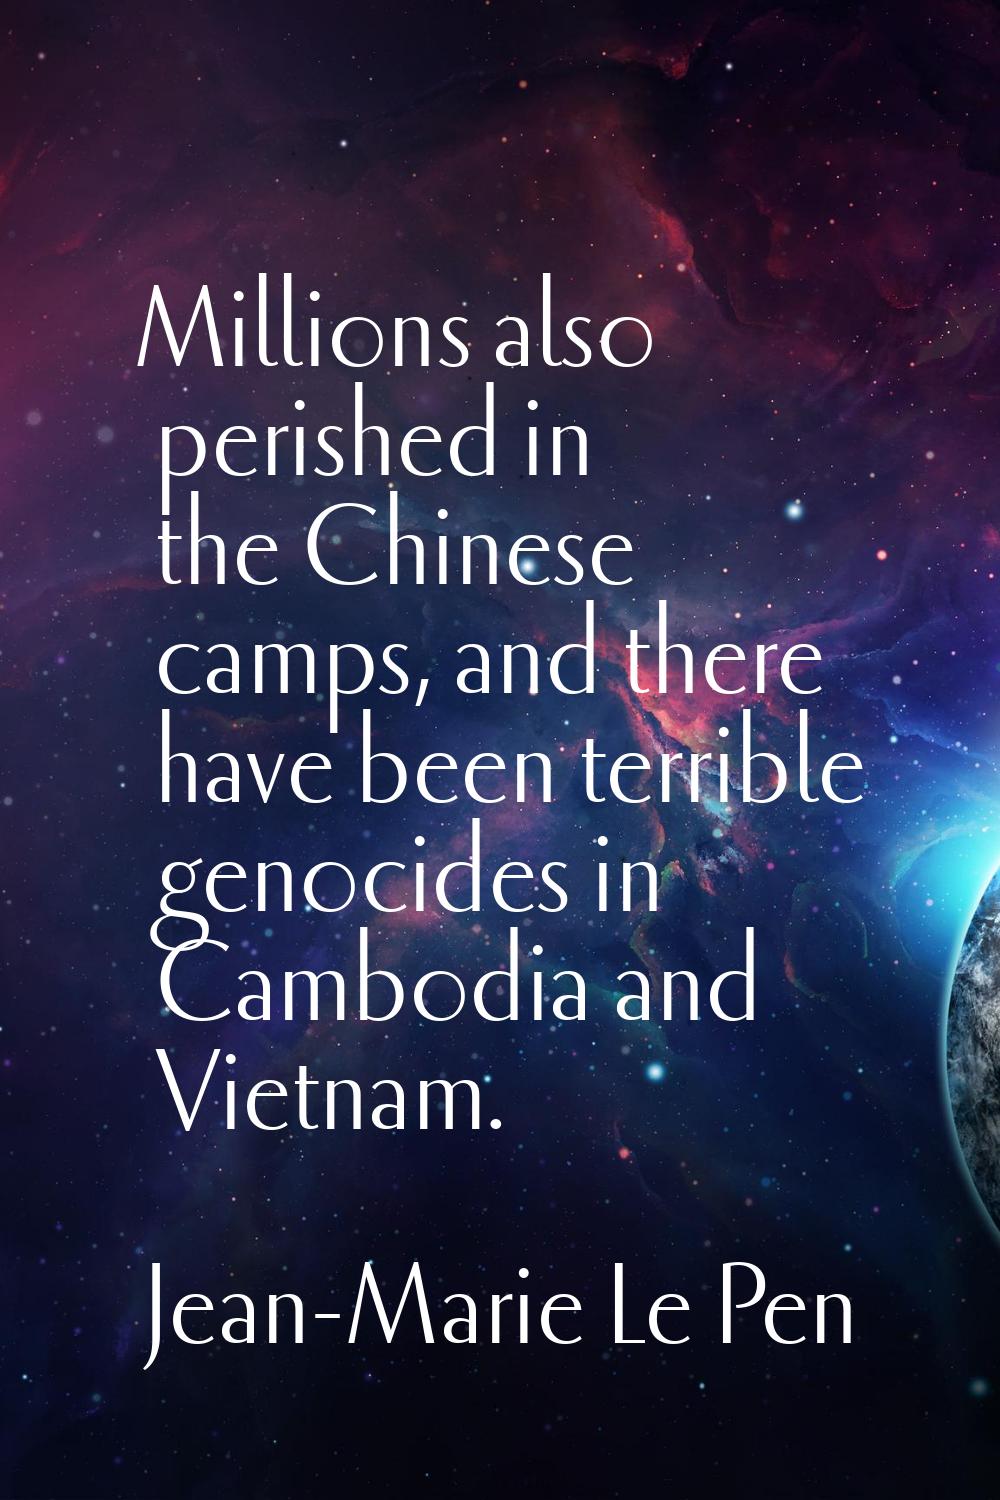 Millions also perished in the Chinese camps, and there have been terrible genocides in Cambodia and